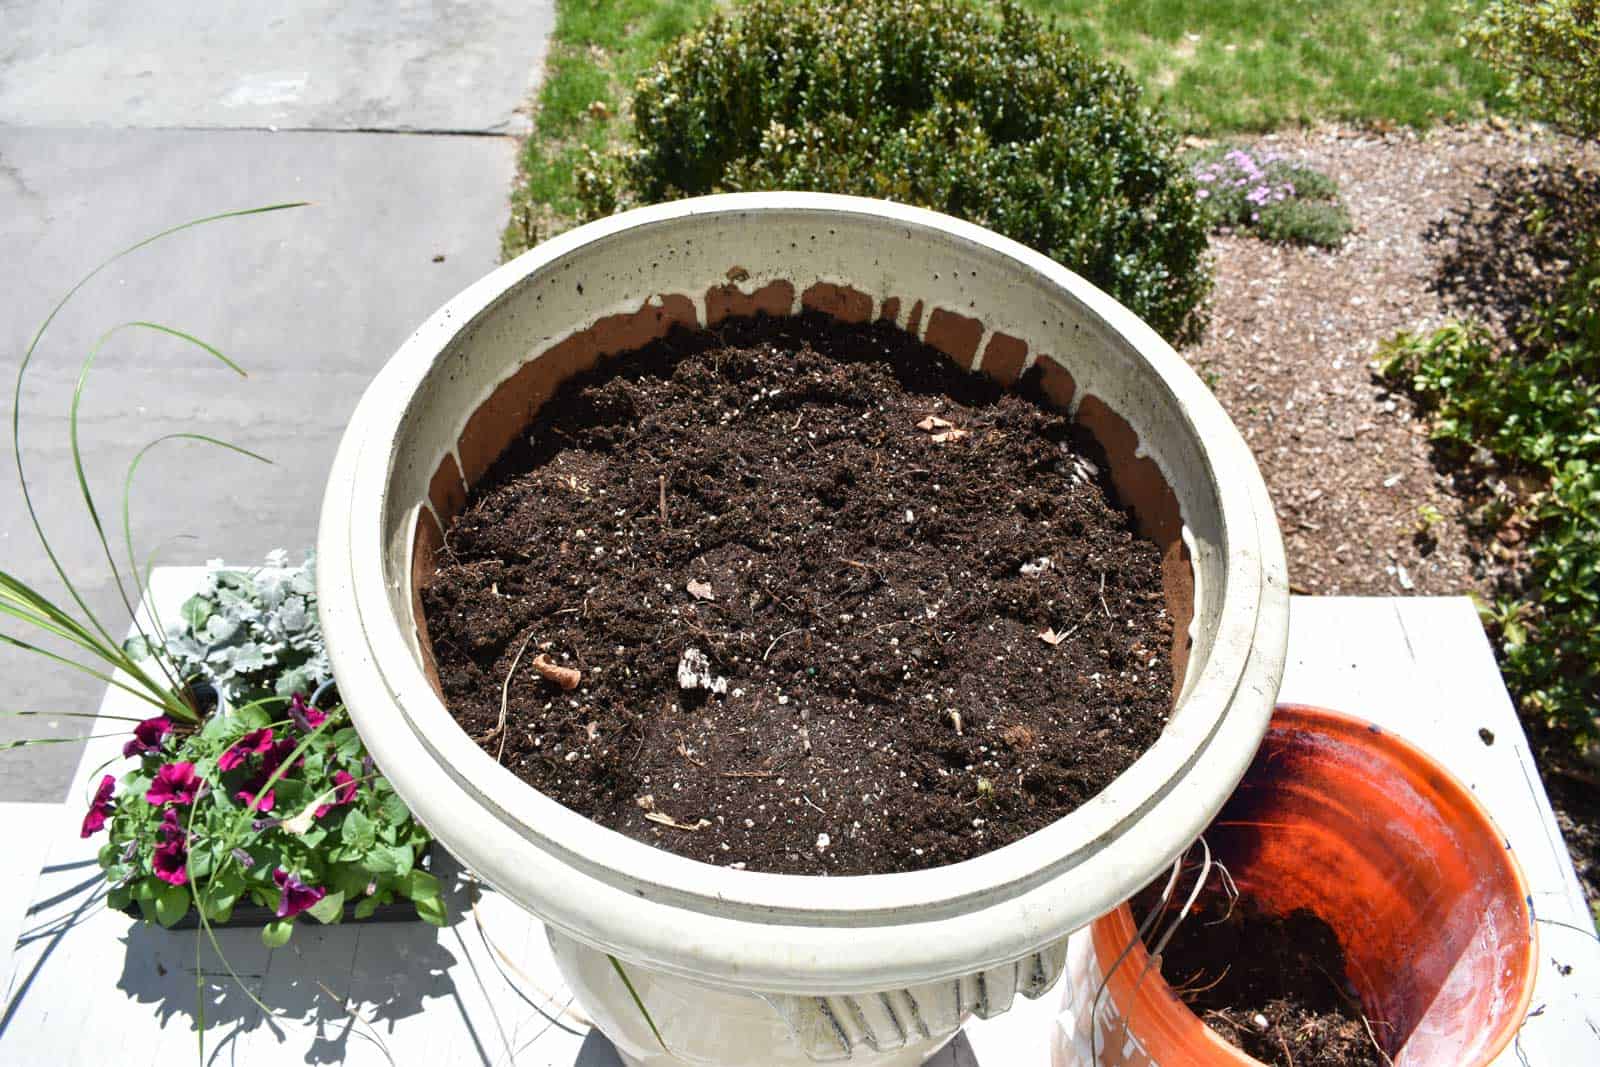 remove the dead plants from winter planters